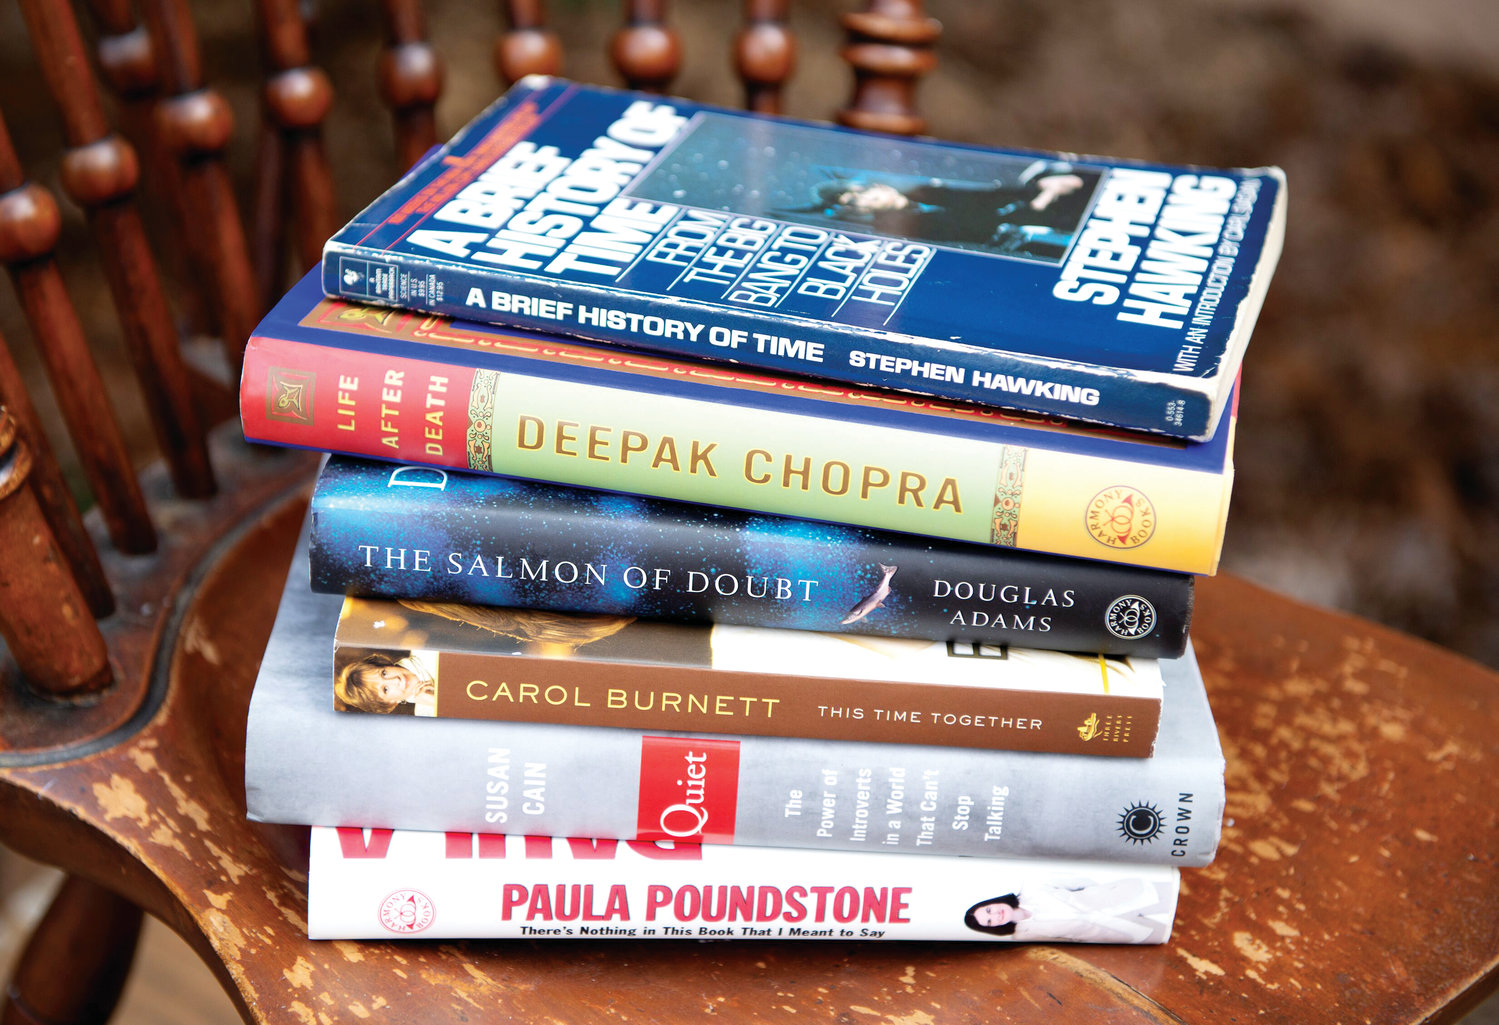 Working in publishing for more than 40 years, Peter Guzzardi has edited many notable books, some of which are pictured above.